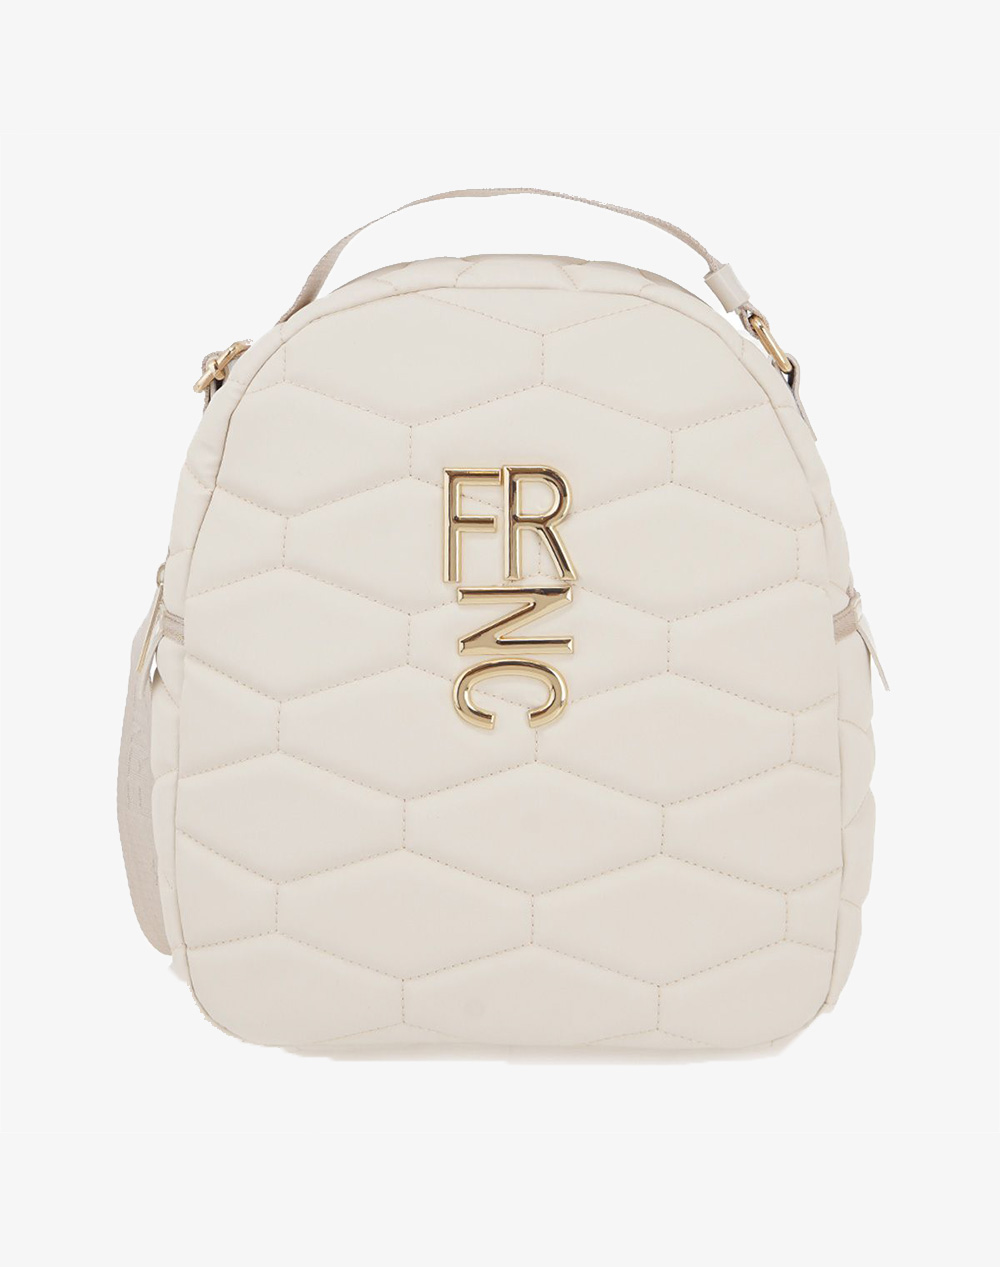 FRNC BACKPACK (Διαστάσεις: 12 x 30.5 x 28 εκ) S618R908907S-07S Ivory